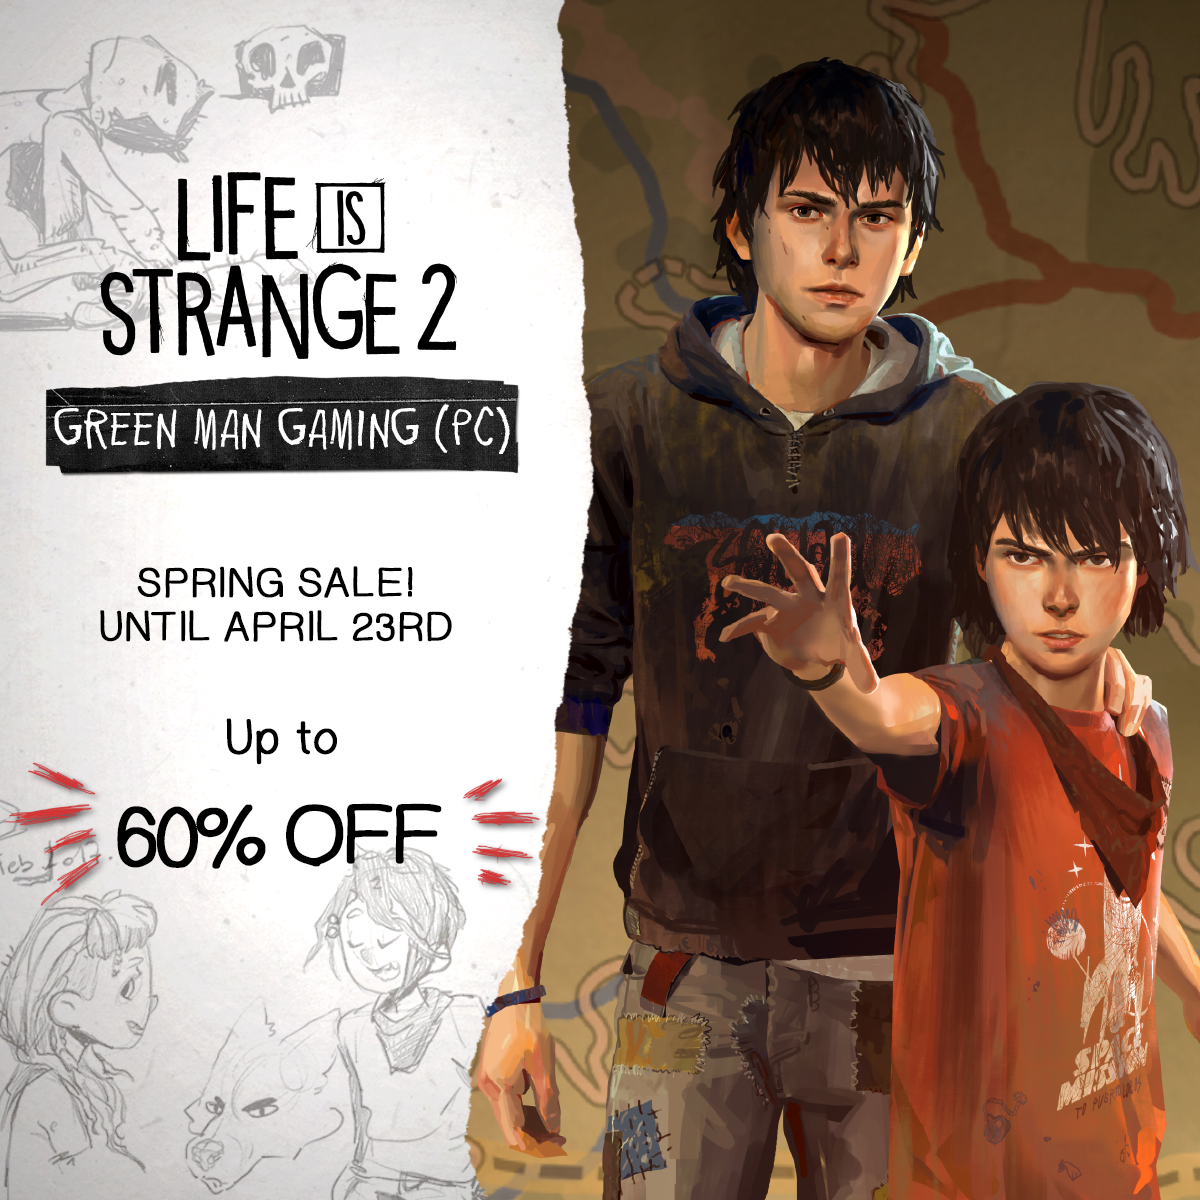 The Complete Season of #LifeIsStrange2 is currently on sale on Green Man Gaming as part of their Spring Sale until April 23rd!
Find the offer here: https://sqex.link/GMG